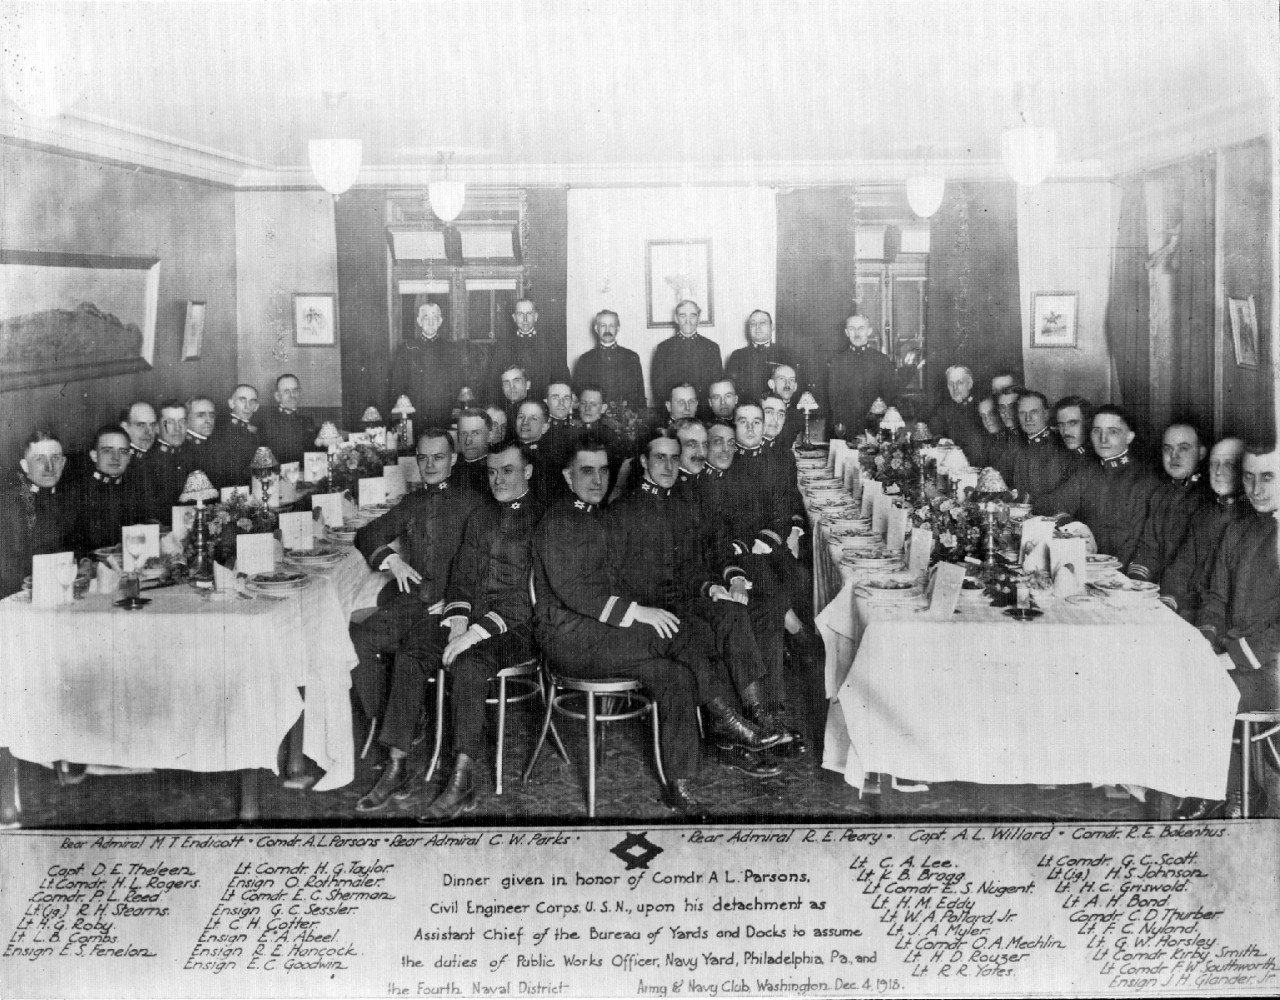 Officer’s Mess Night or “Dining-in” at the Army-Navy Club, Washington, D.C., December 4, 1913. The dinner was in honor of Commander Alan Parsons, CEC, USN, upon his detachment as Assistant Chief of the Bureau of Yards and Docks. Next, he assumed the duties as Public Works Offer at the Philadelphia Navy Yard. 